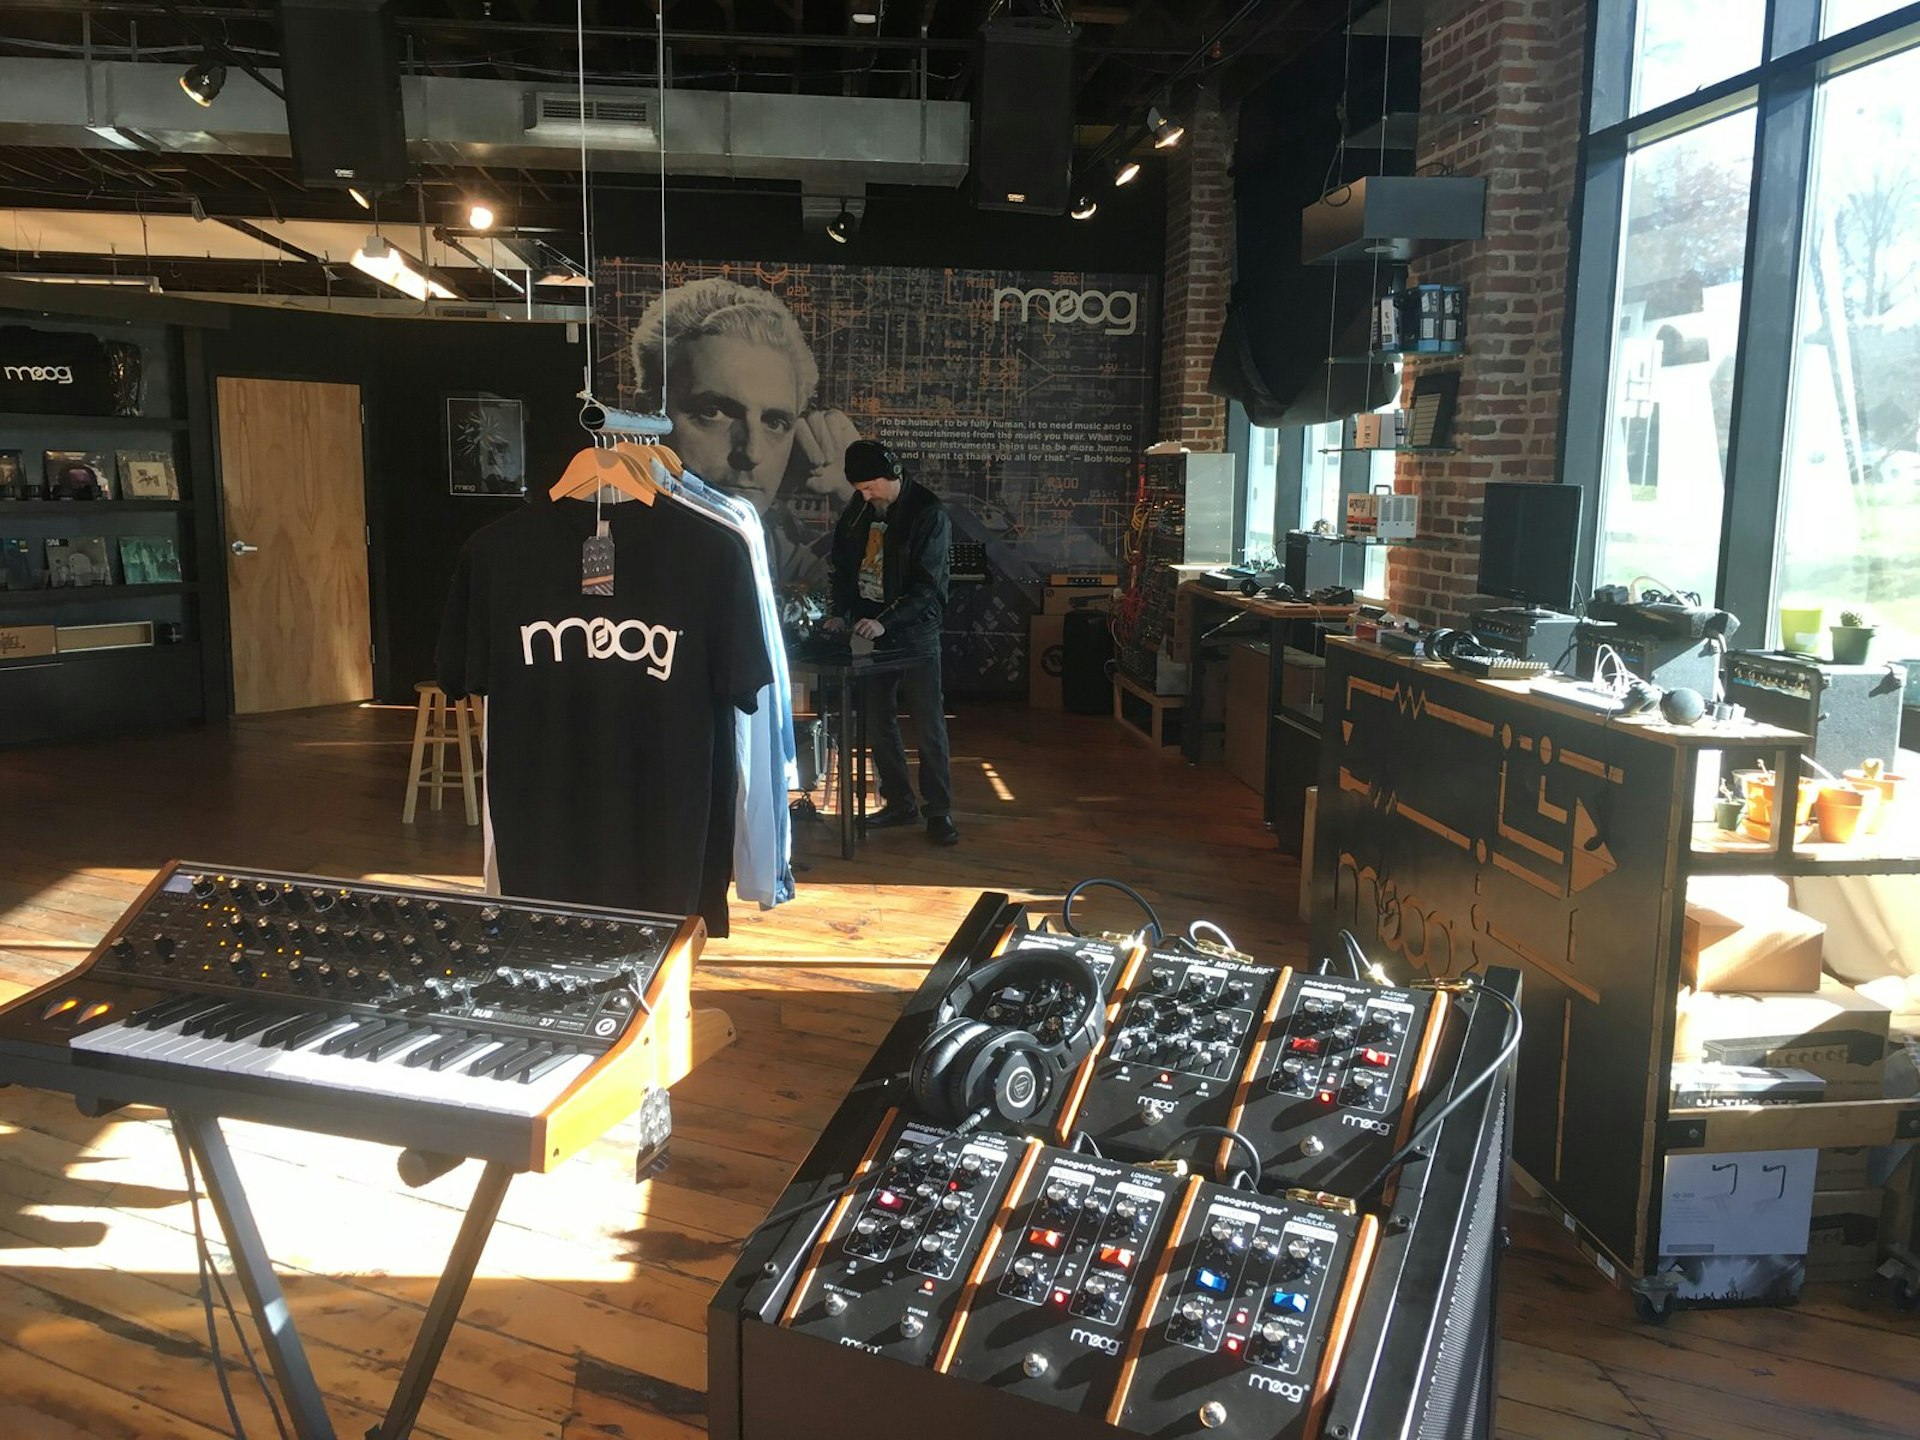 Behind a synthesizer and electronic keyboard are racks of merchandise marked with the logo for 'Moog', an Asheville-born factory that makes electronic synthesizers.